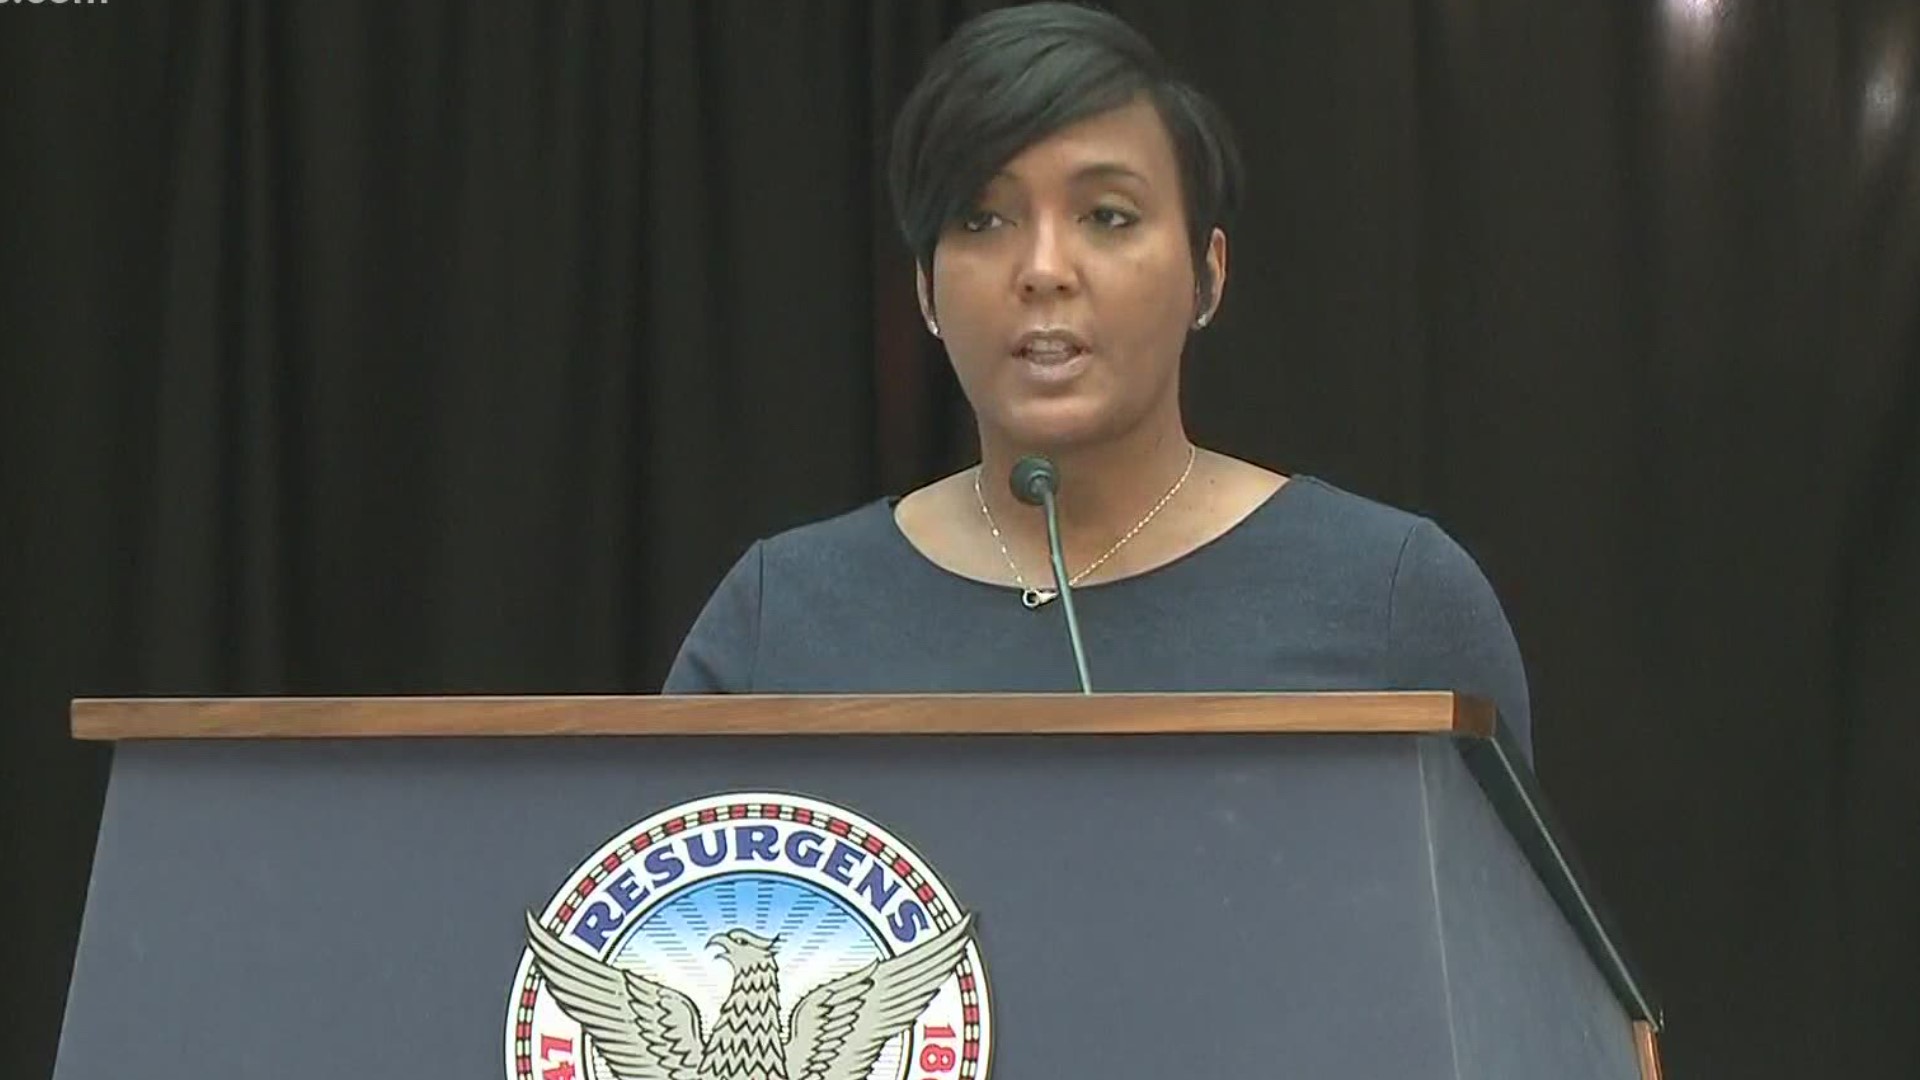 Mayor Keisha Lance Bottoms said she does not believe the shooting of Rayshard Brooks was justified.